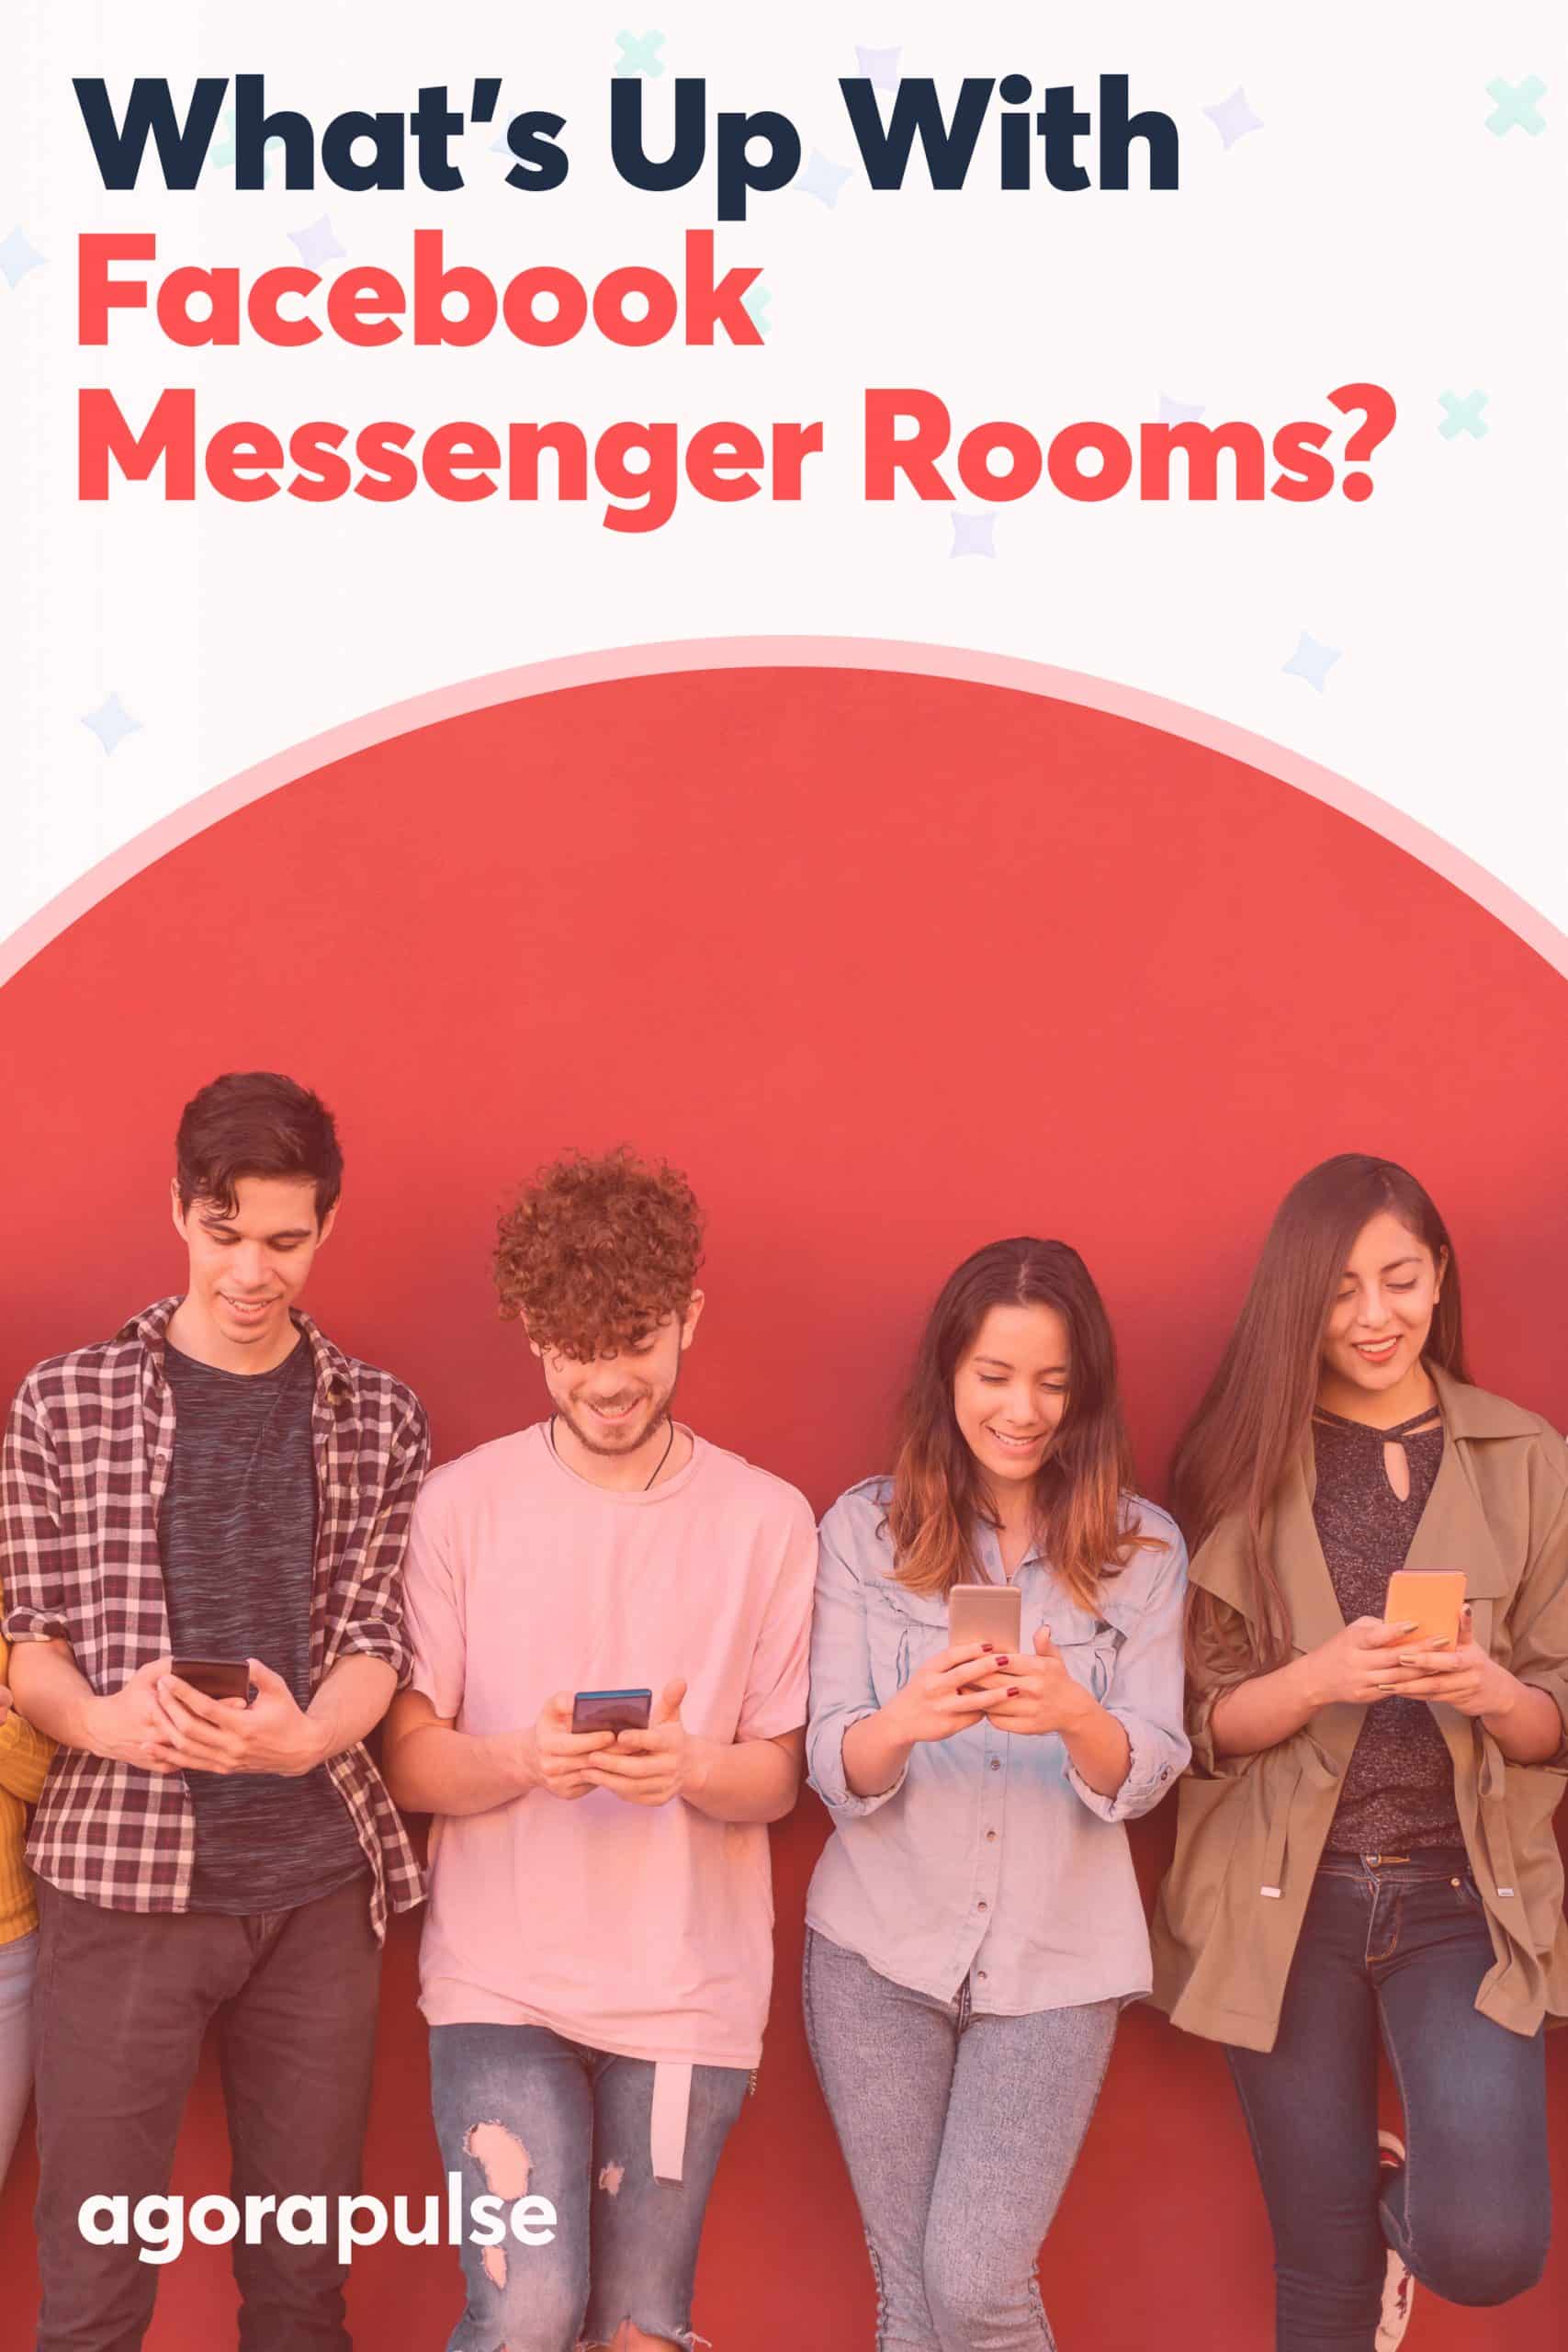 Everyone\'s Talking About Facebook Messenger Rooms but What Do They Mean for You?